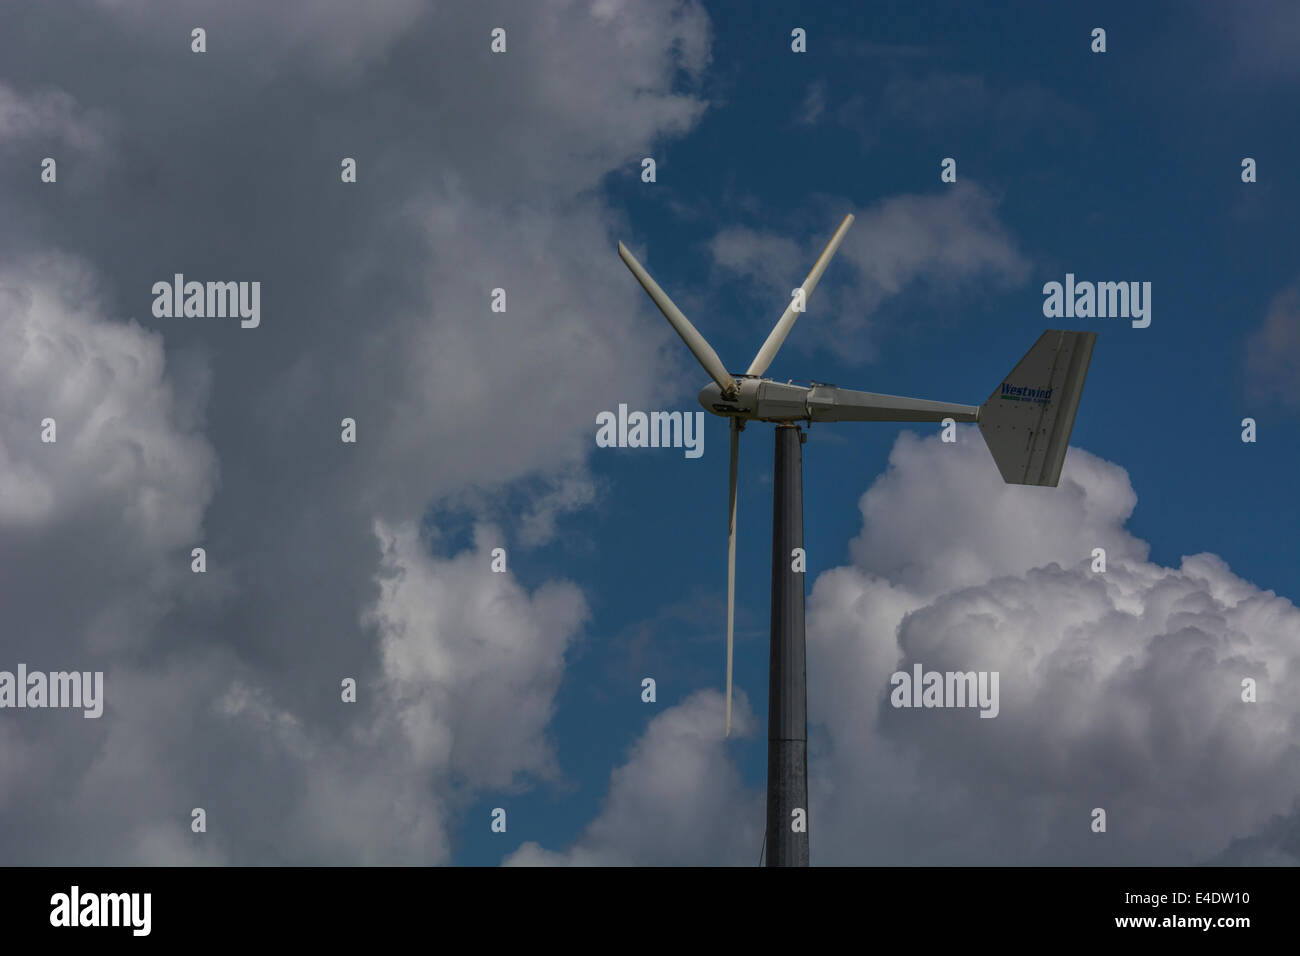 Wind turbine / wind generator set against cloudy summer skies. A 'renewable' form of power useful in the climate change energy mix. Stock Photo